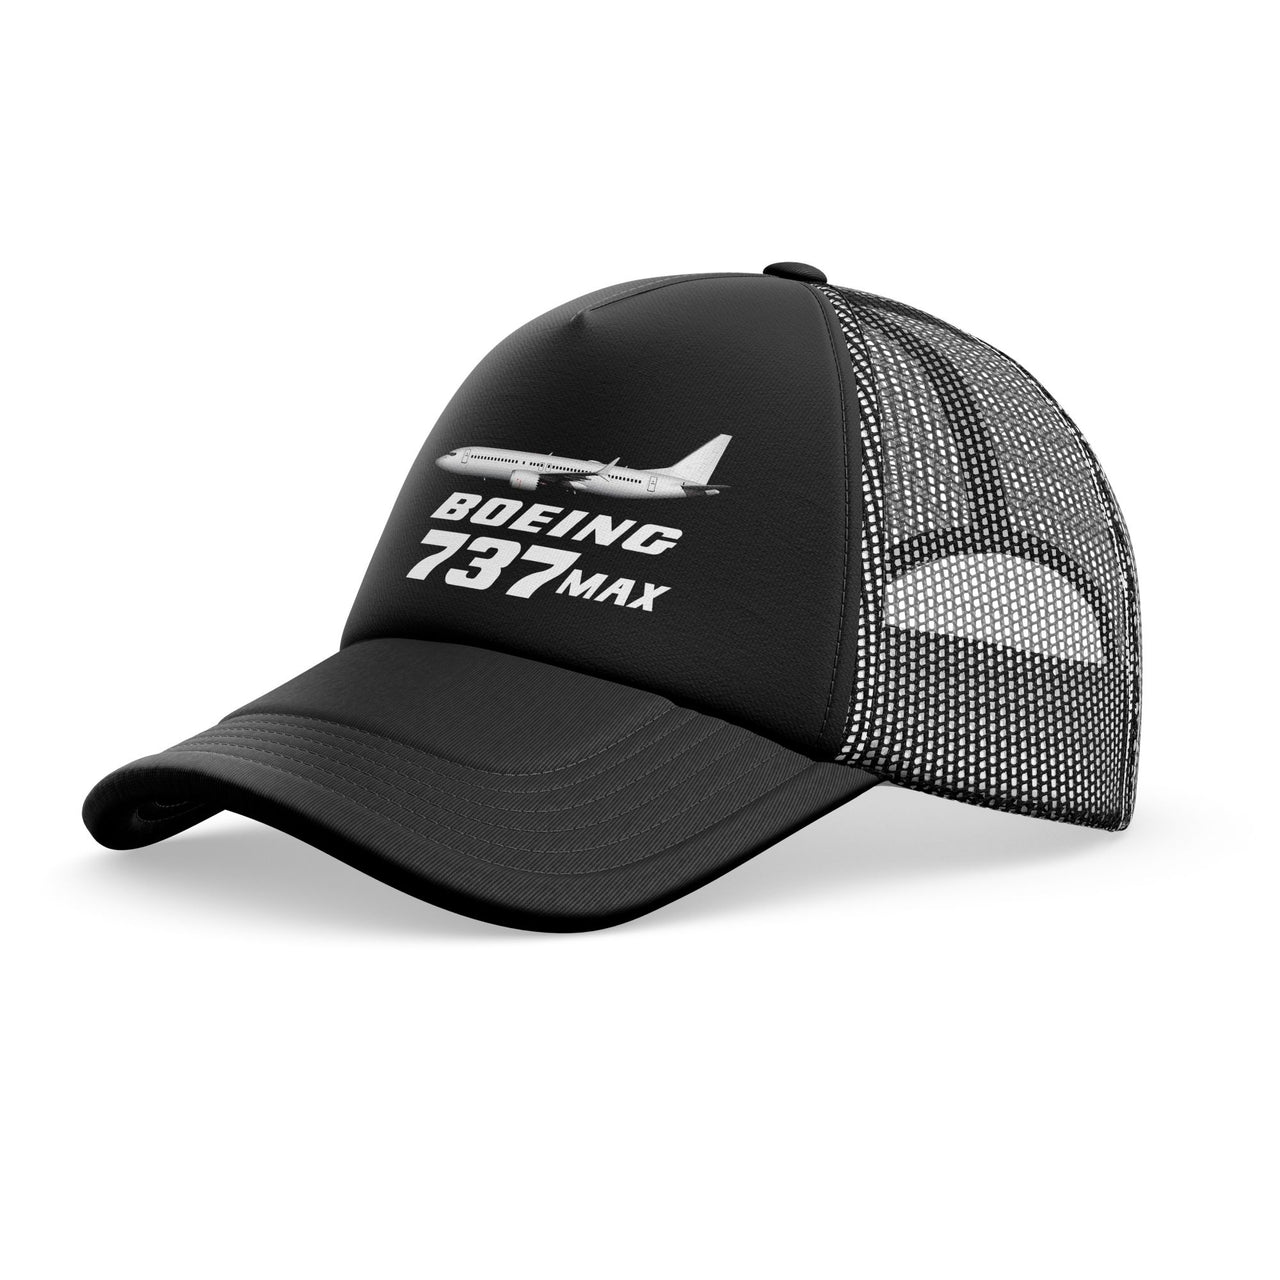 The Boeing 737Max Designed Trucker Caps & Hats